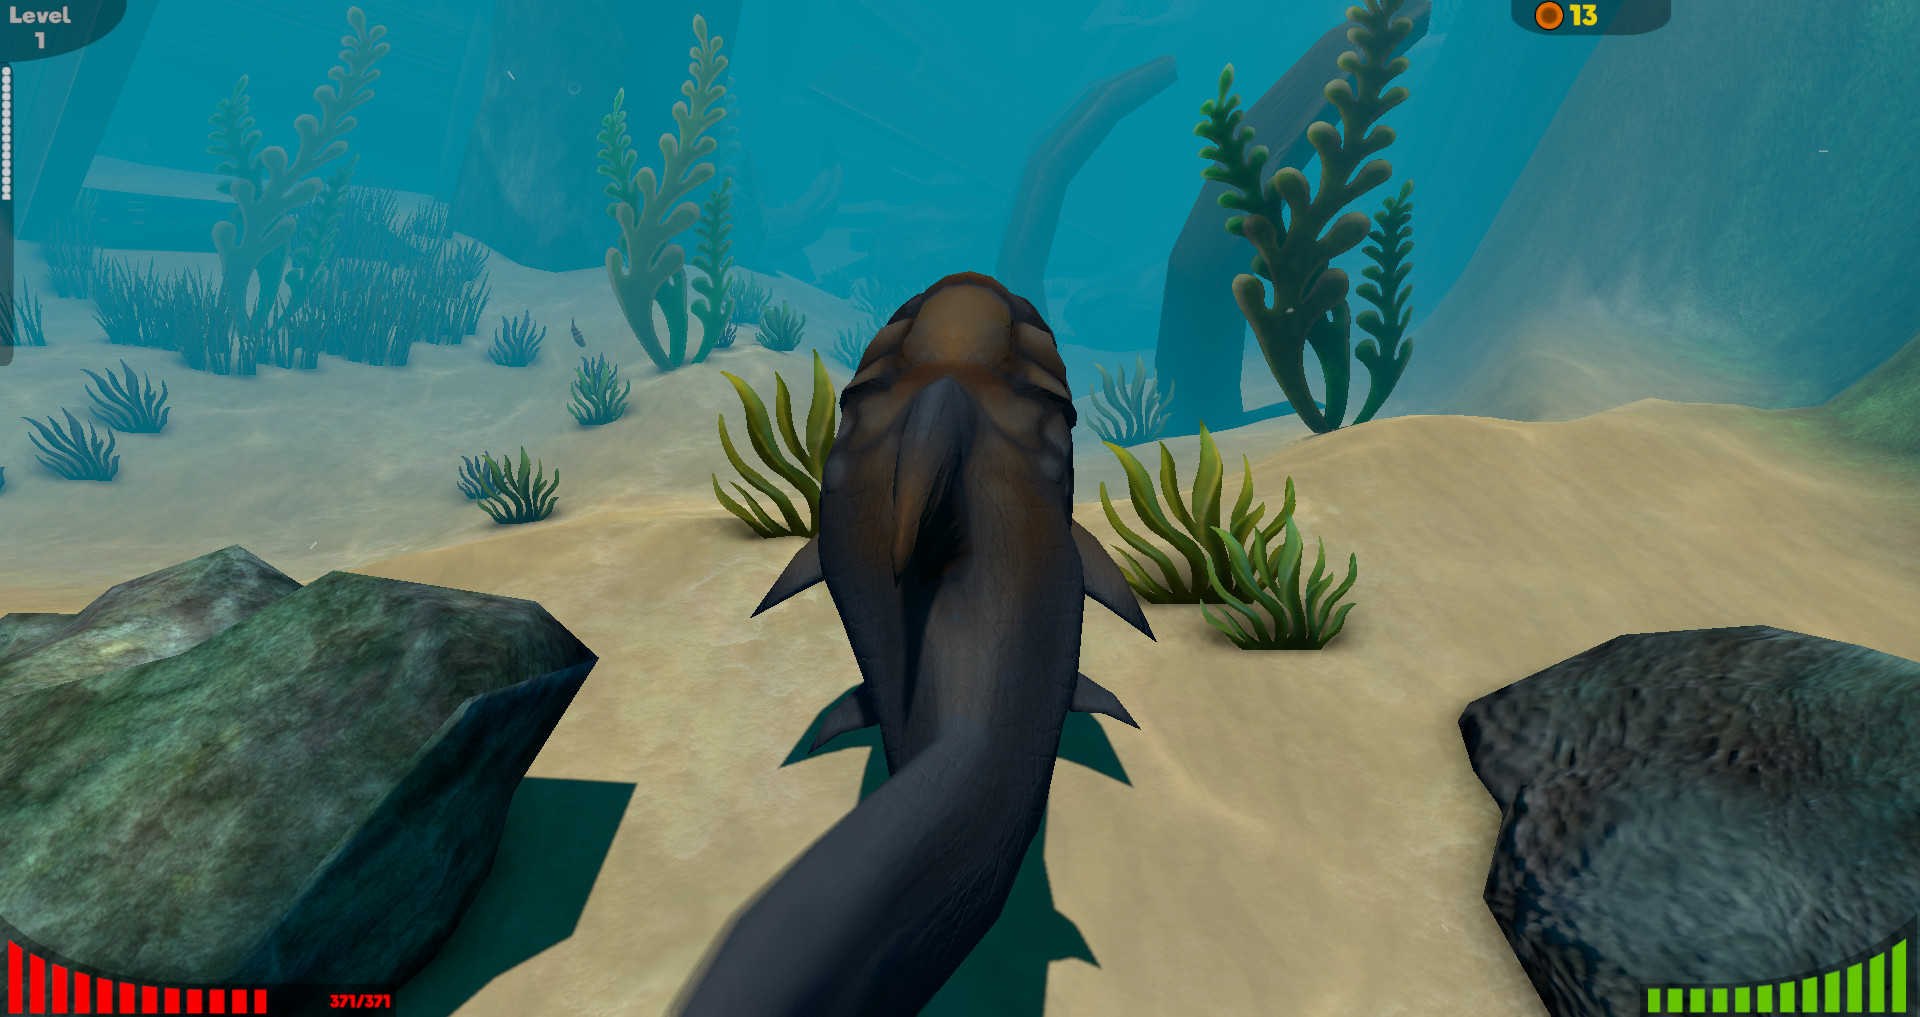 Steam :: Feed and Grow: Fish :: Update 0.14.1